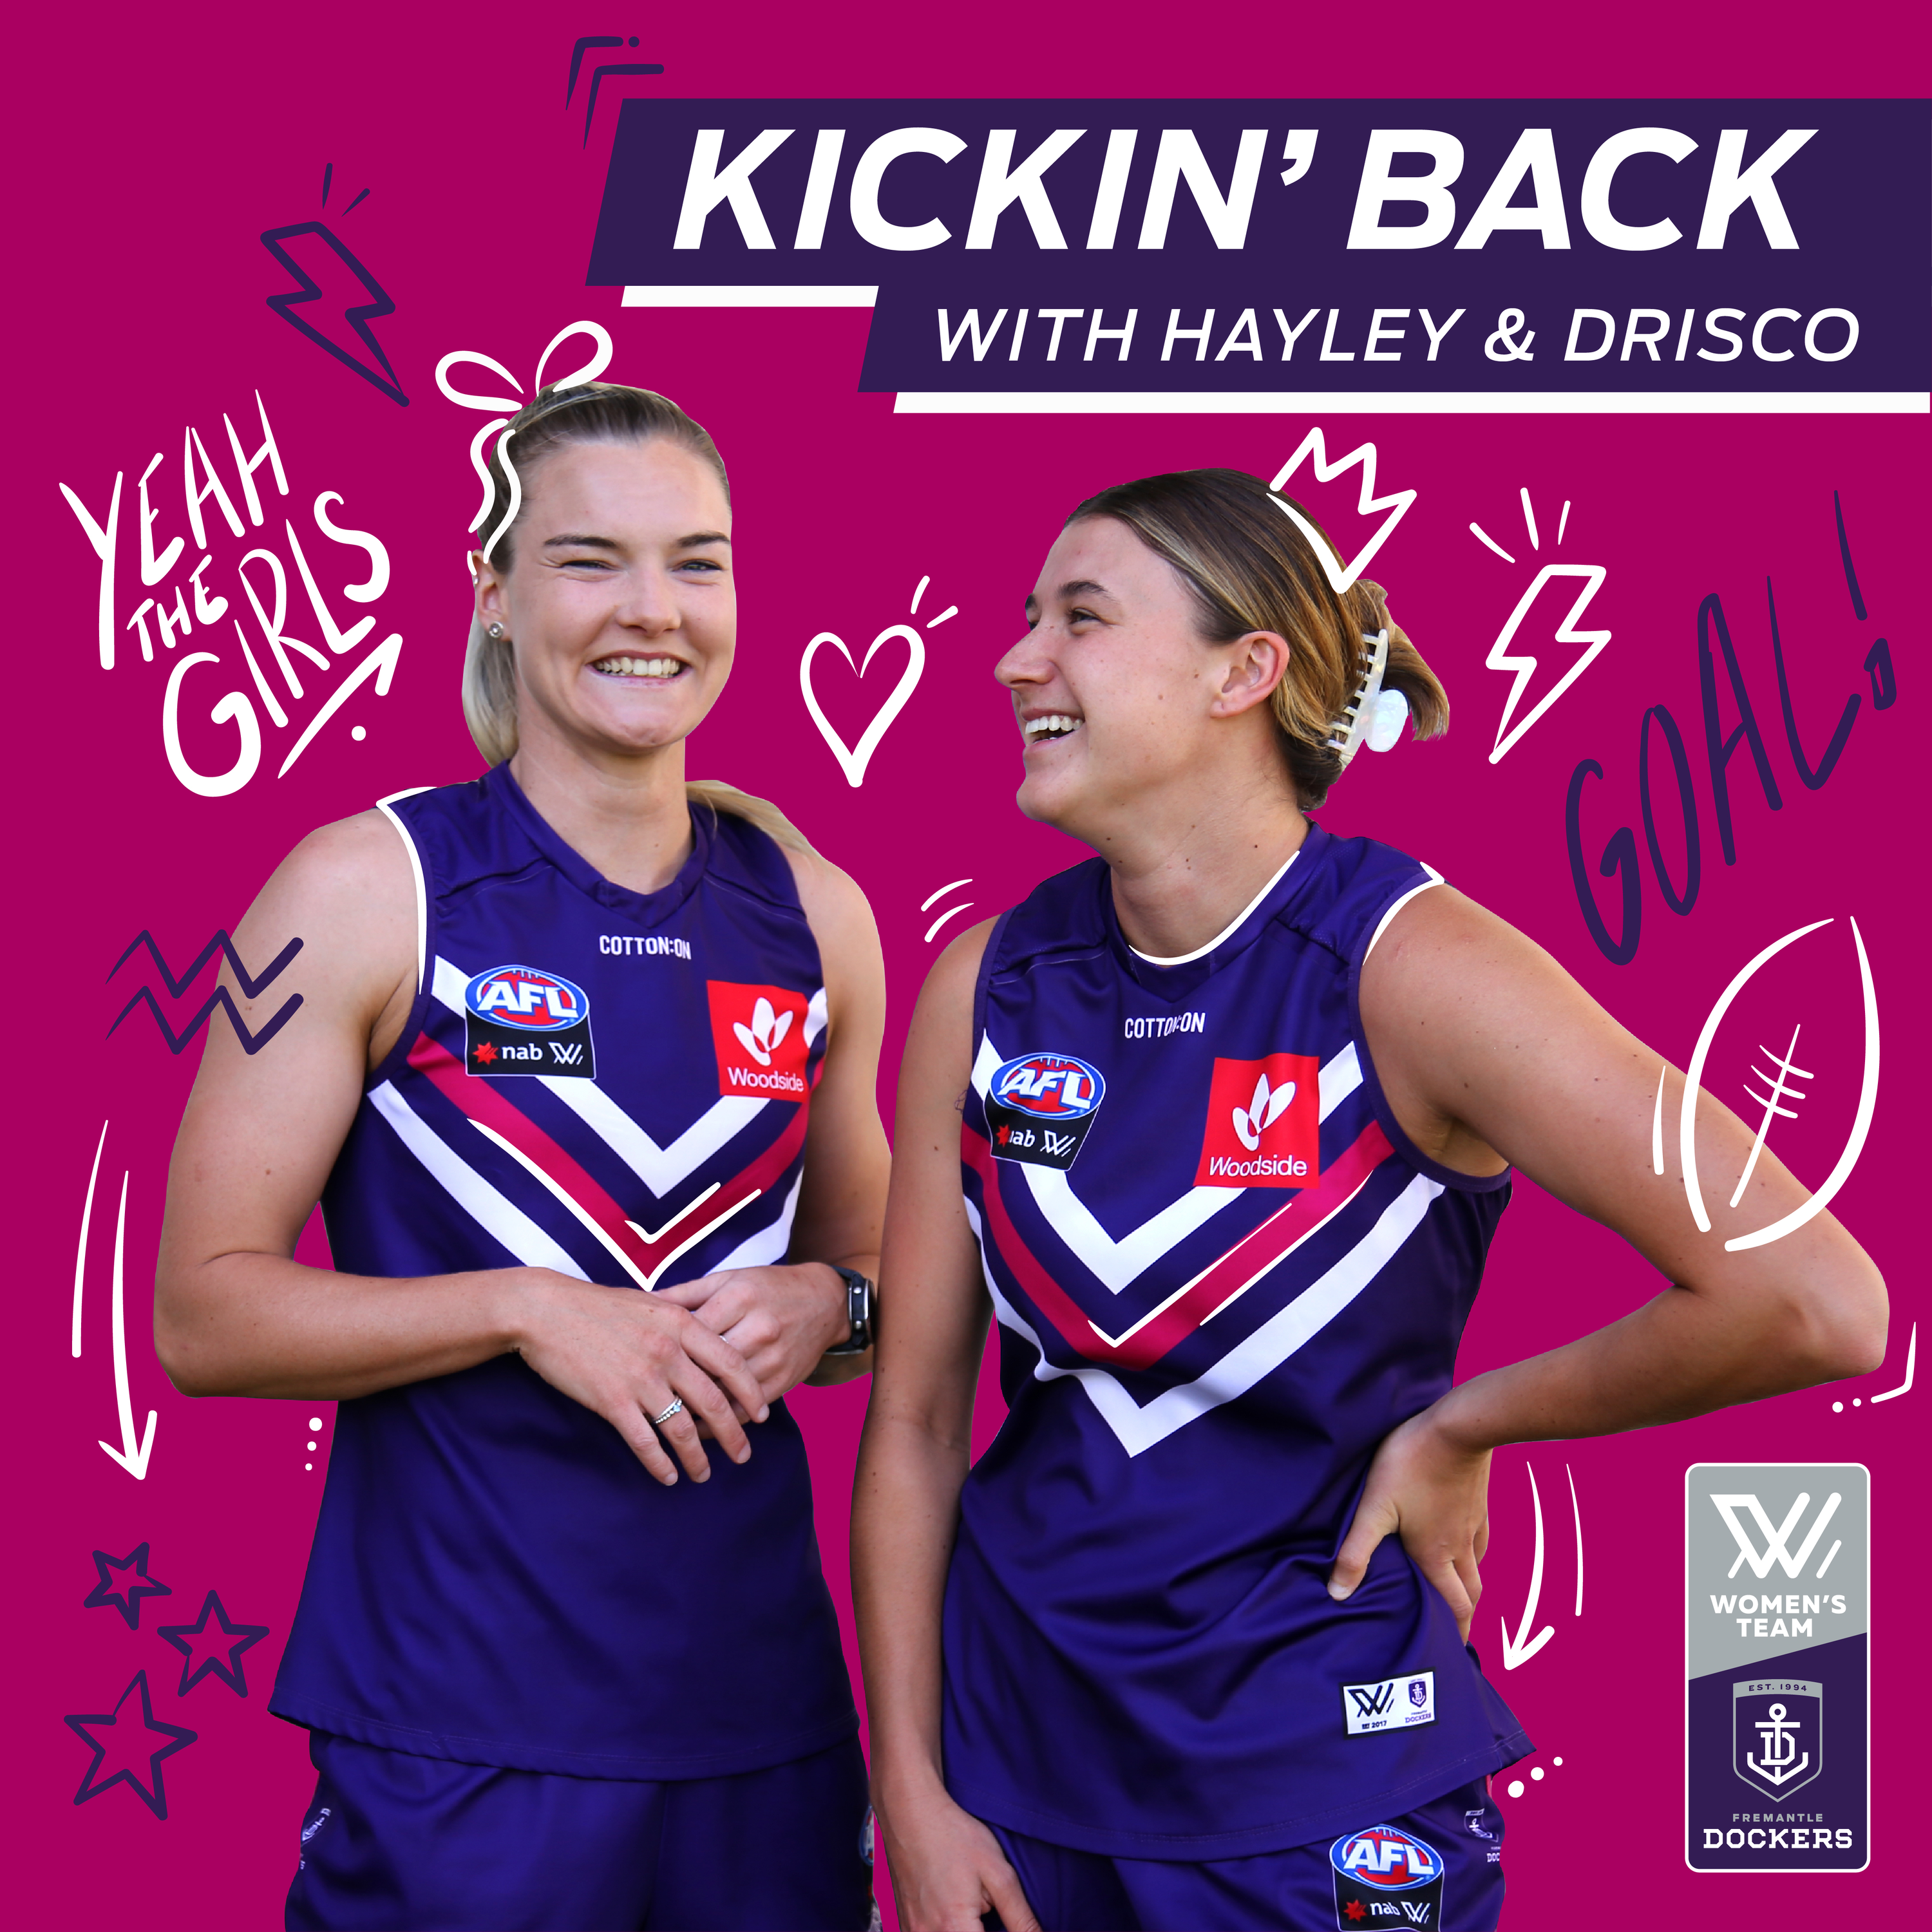 24. Kickin' Back with Hayley and Drisco (guest free!)